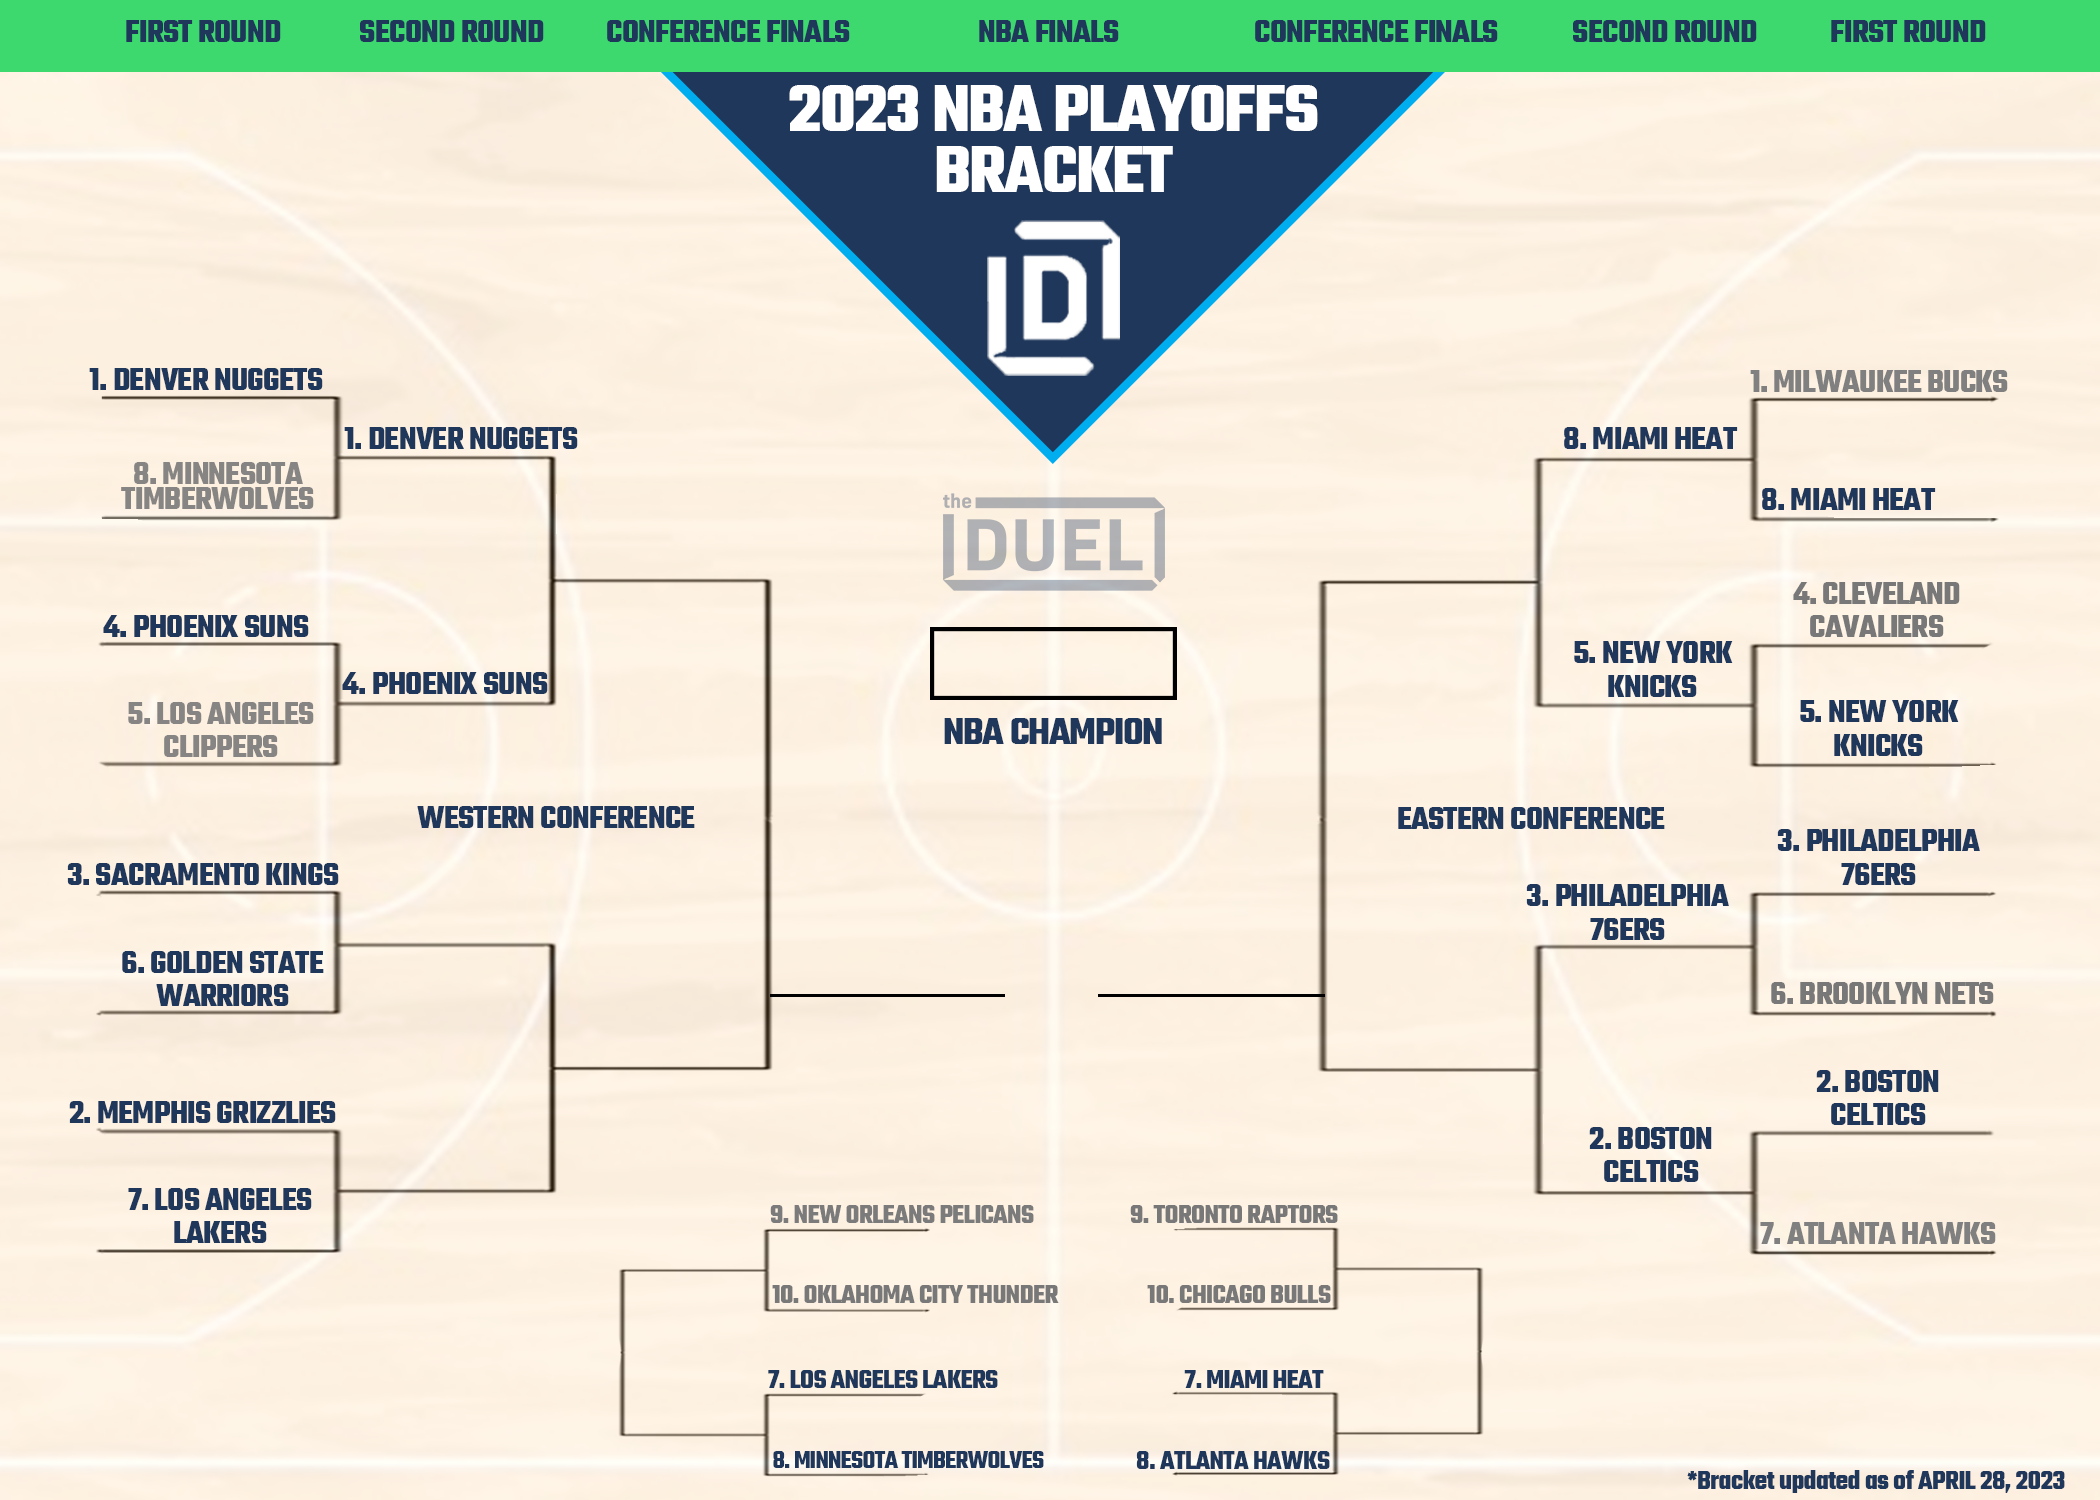 NBA in-season tournament knockout bracket finalized. See who's in